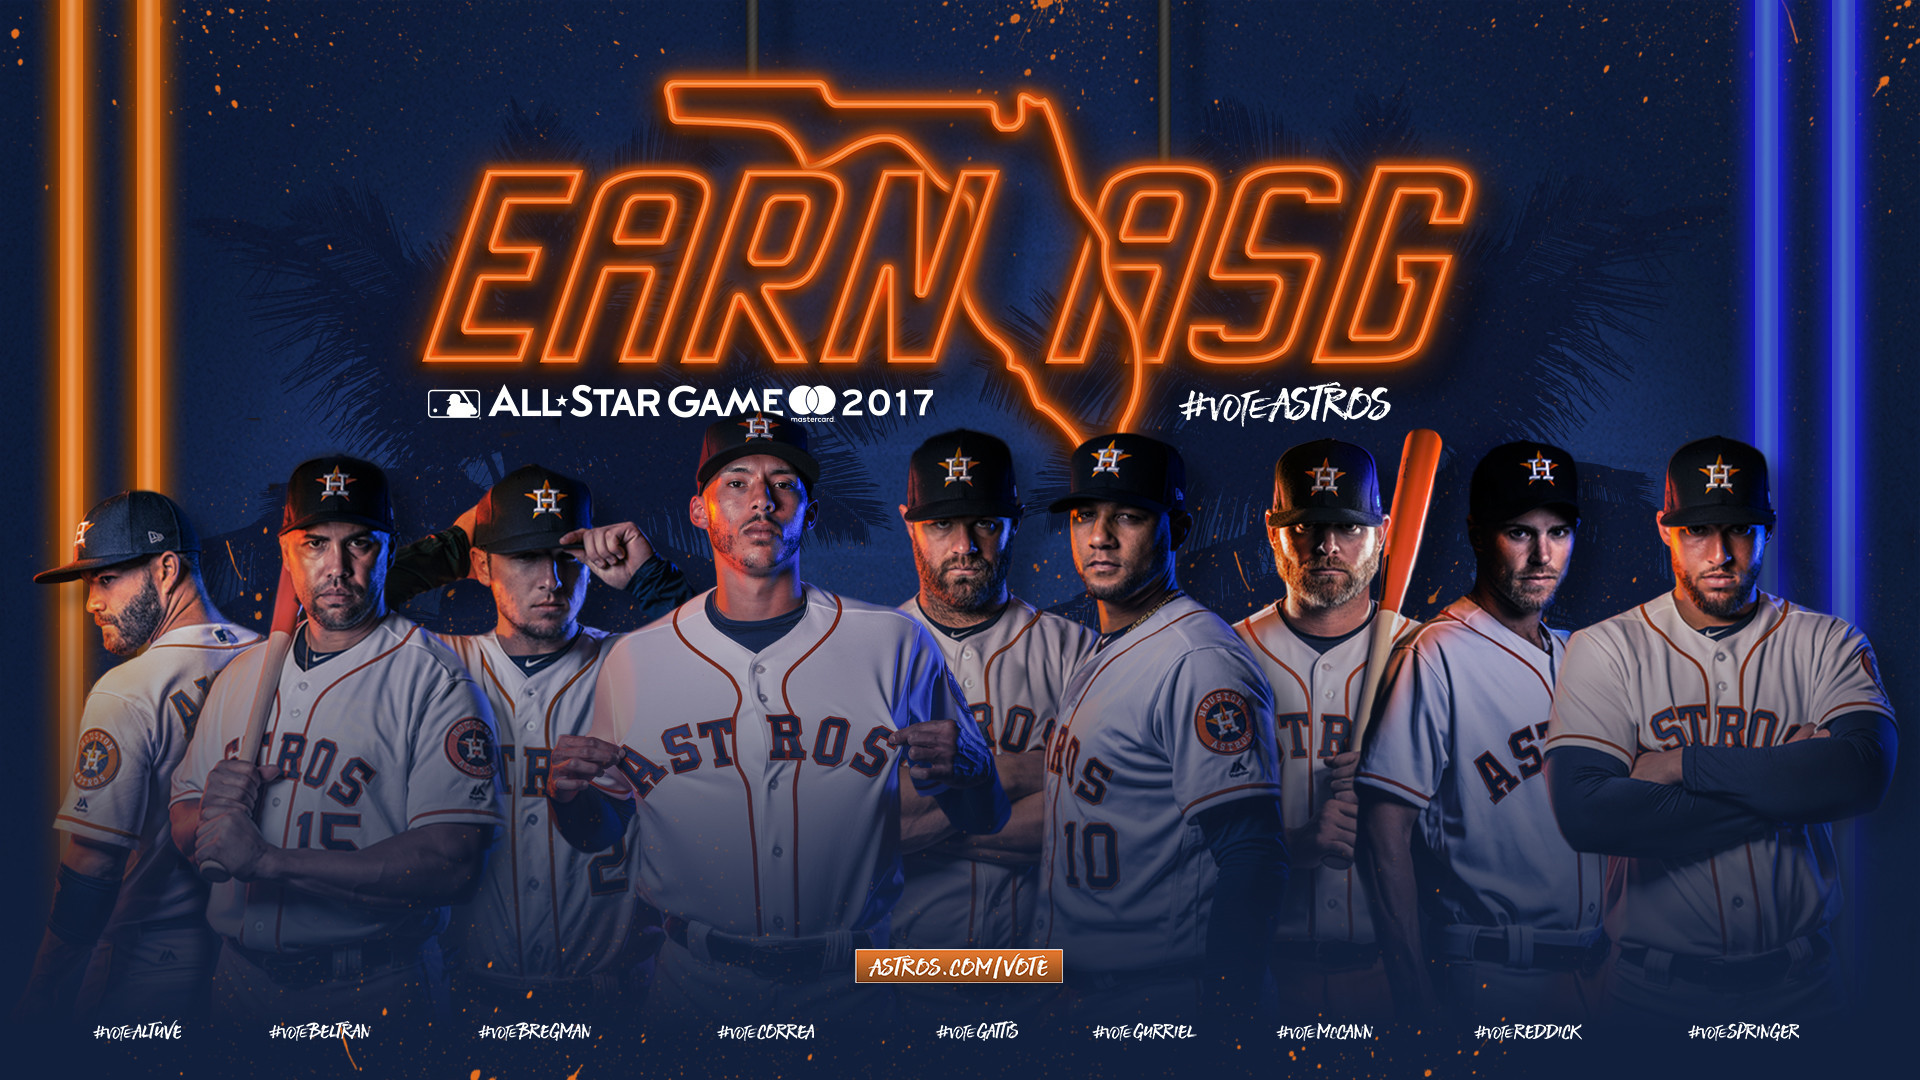 1920x1080 (Res:  px) Top on S.T. Galleries Houston Astros Wallpaper Mlb